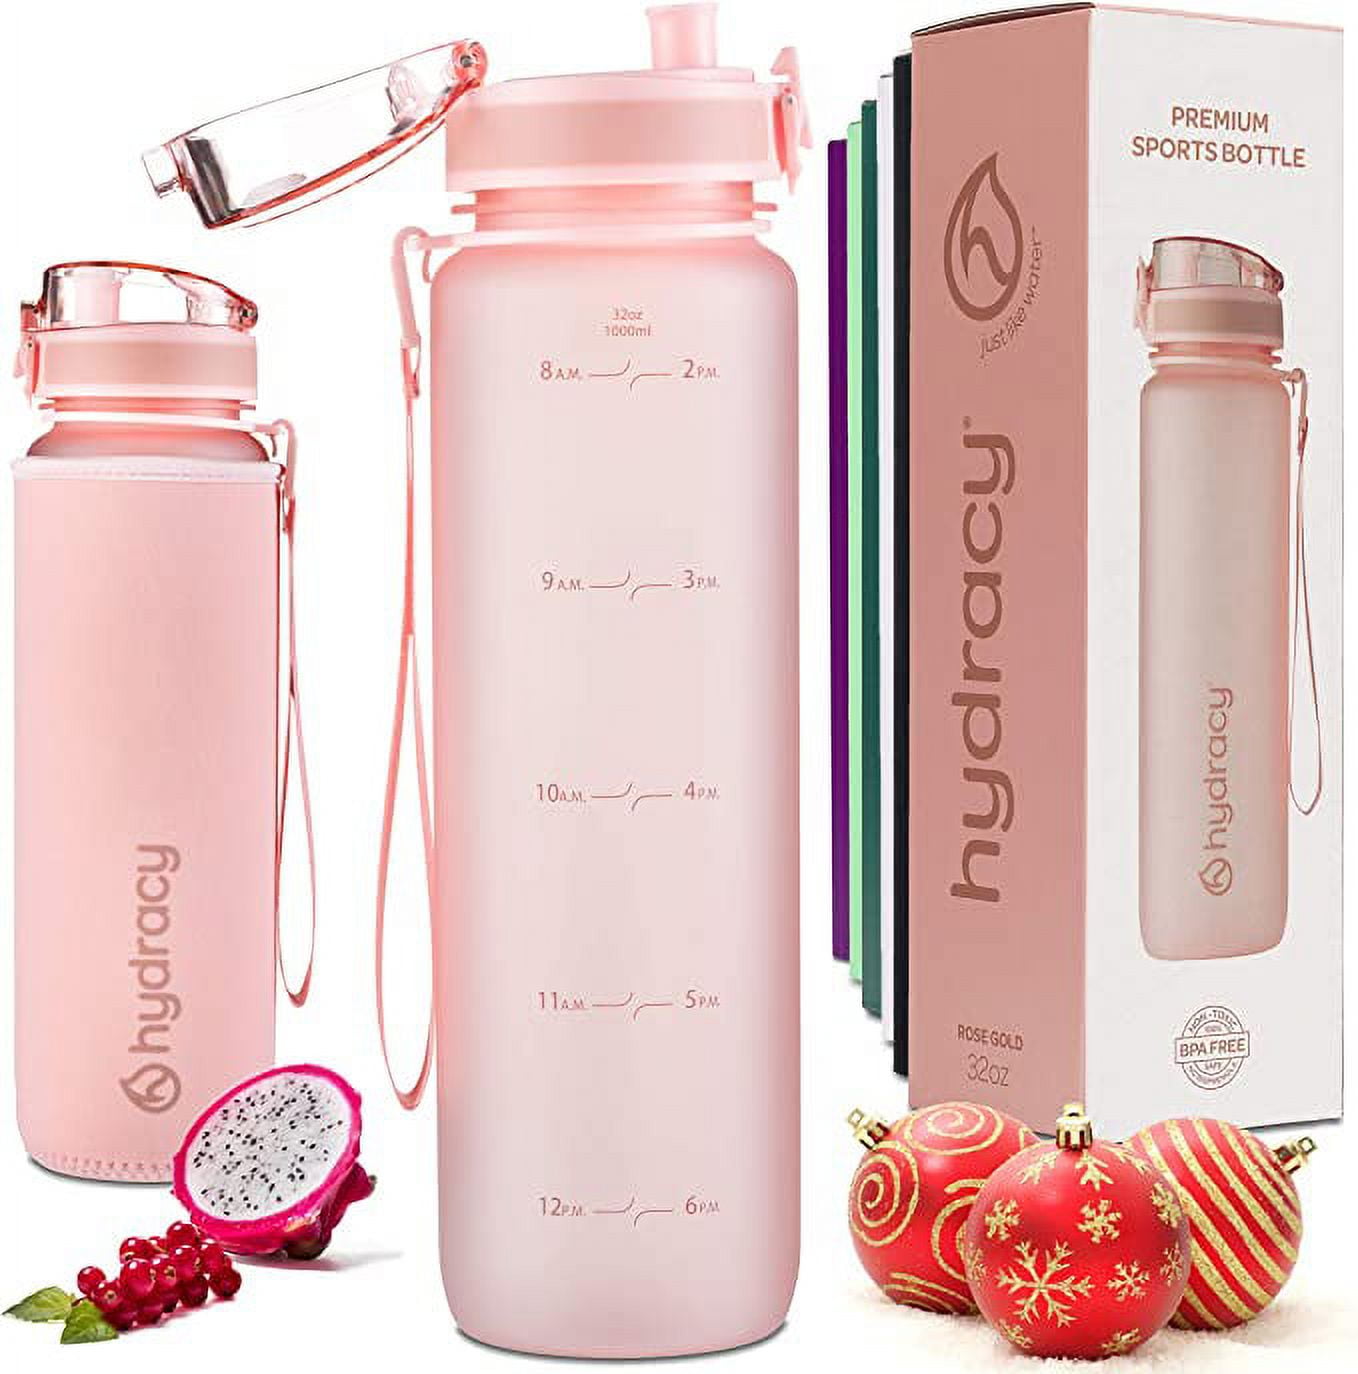 Hydracy Fruit Infuser Water Bottle - 32 oz Sports Bottle - Insulating Sleeve, Time Marker & Full Length Infusion Rod + 27 Fruit Infused Water